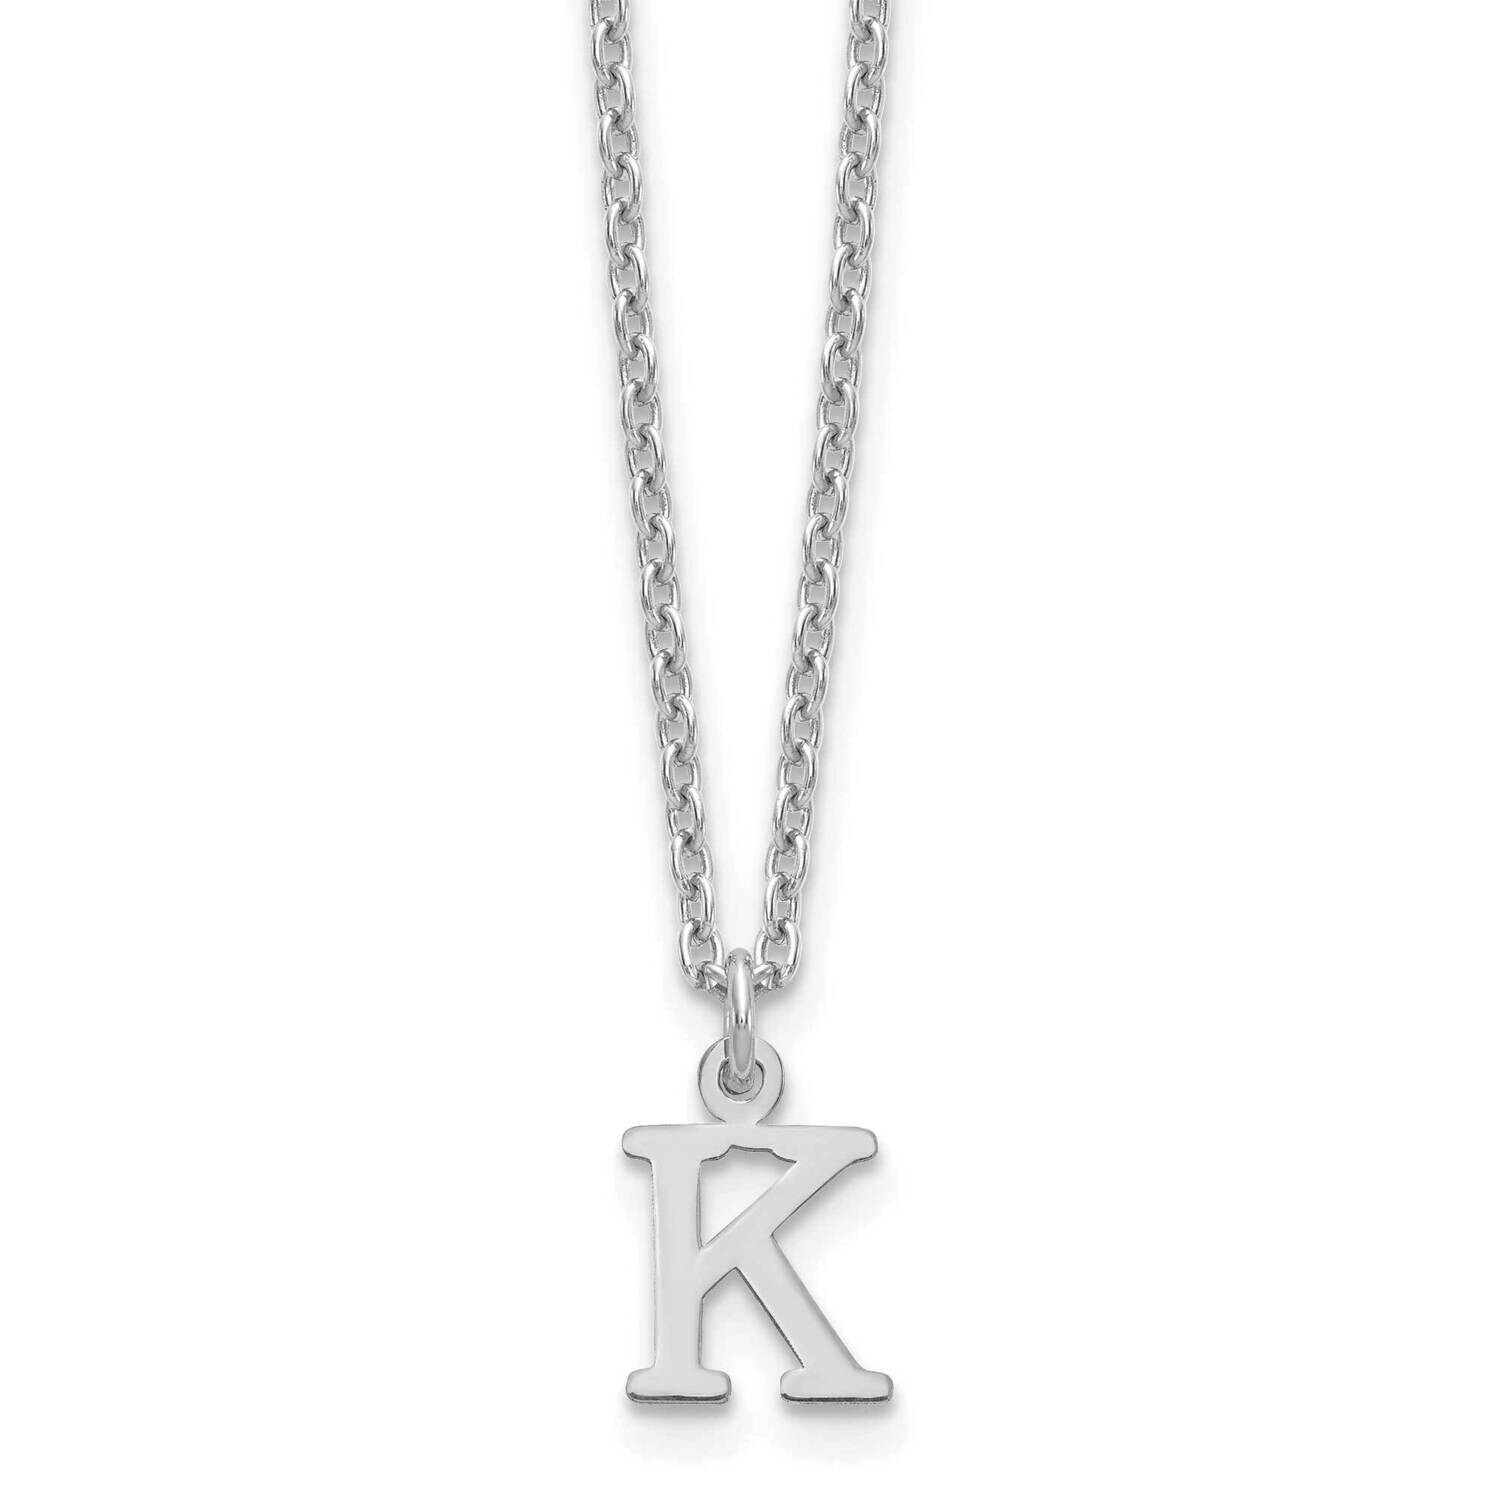 Cutout Letter K Initial Necklace Sterling Silver Rhodium-Plated XNA727SS/K